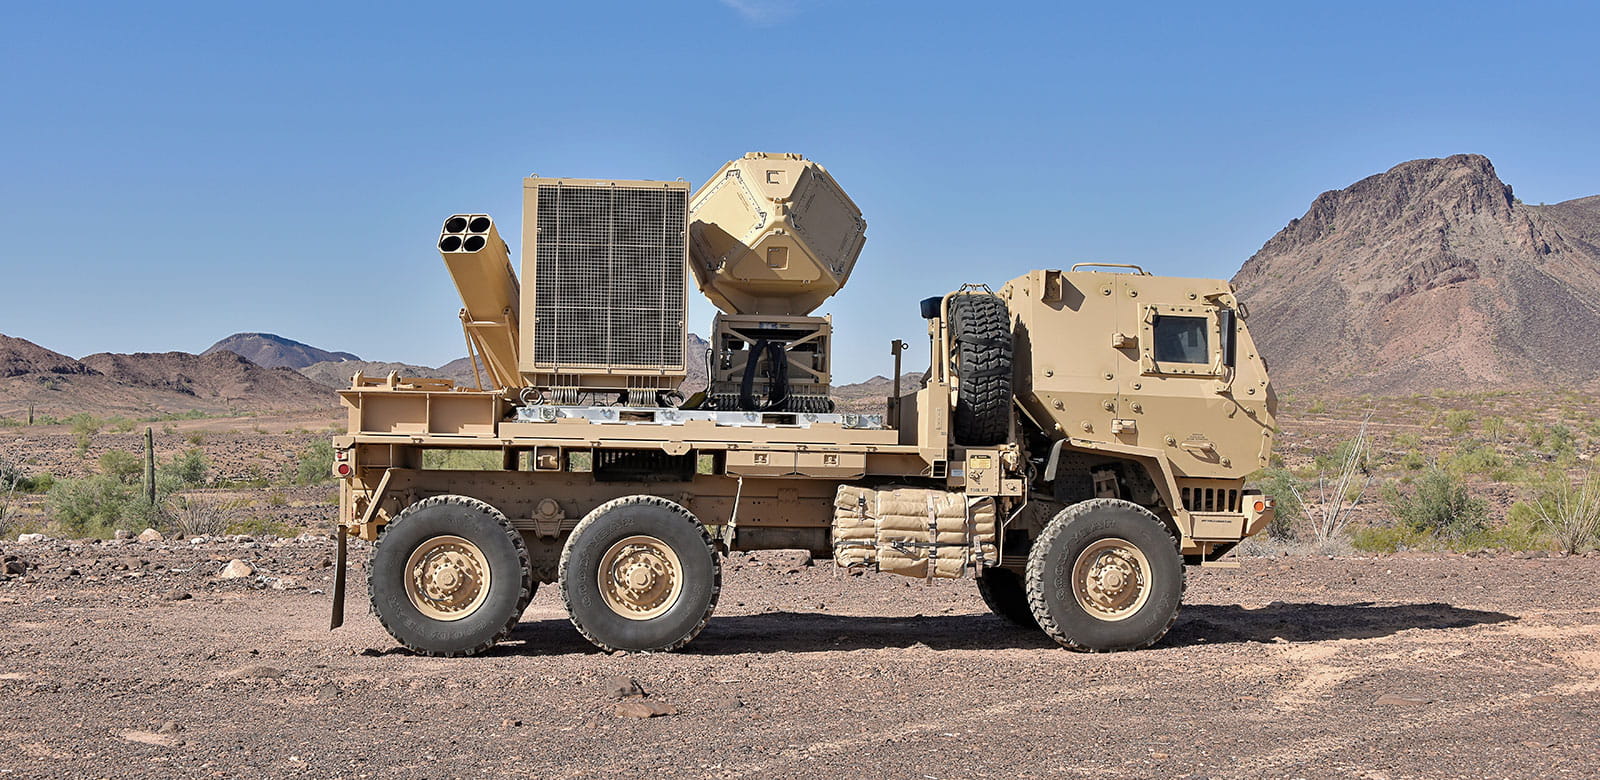 Raytheon Technologies  Has  Been  Awarded  a  $237 million  Contract  By  U.S. Army  For The Anti-Drone System.